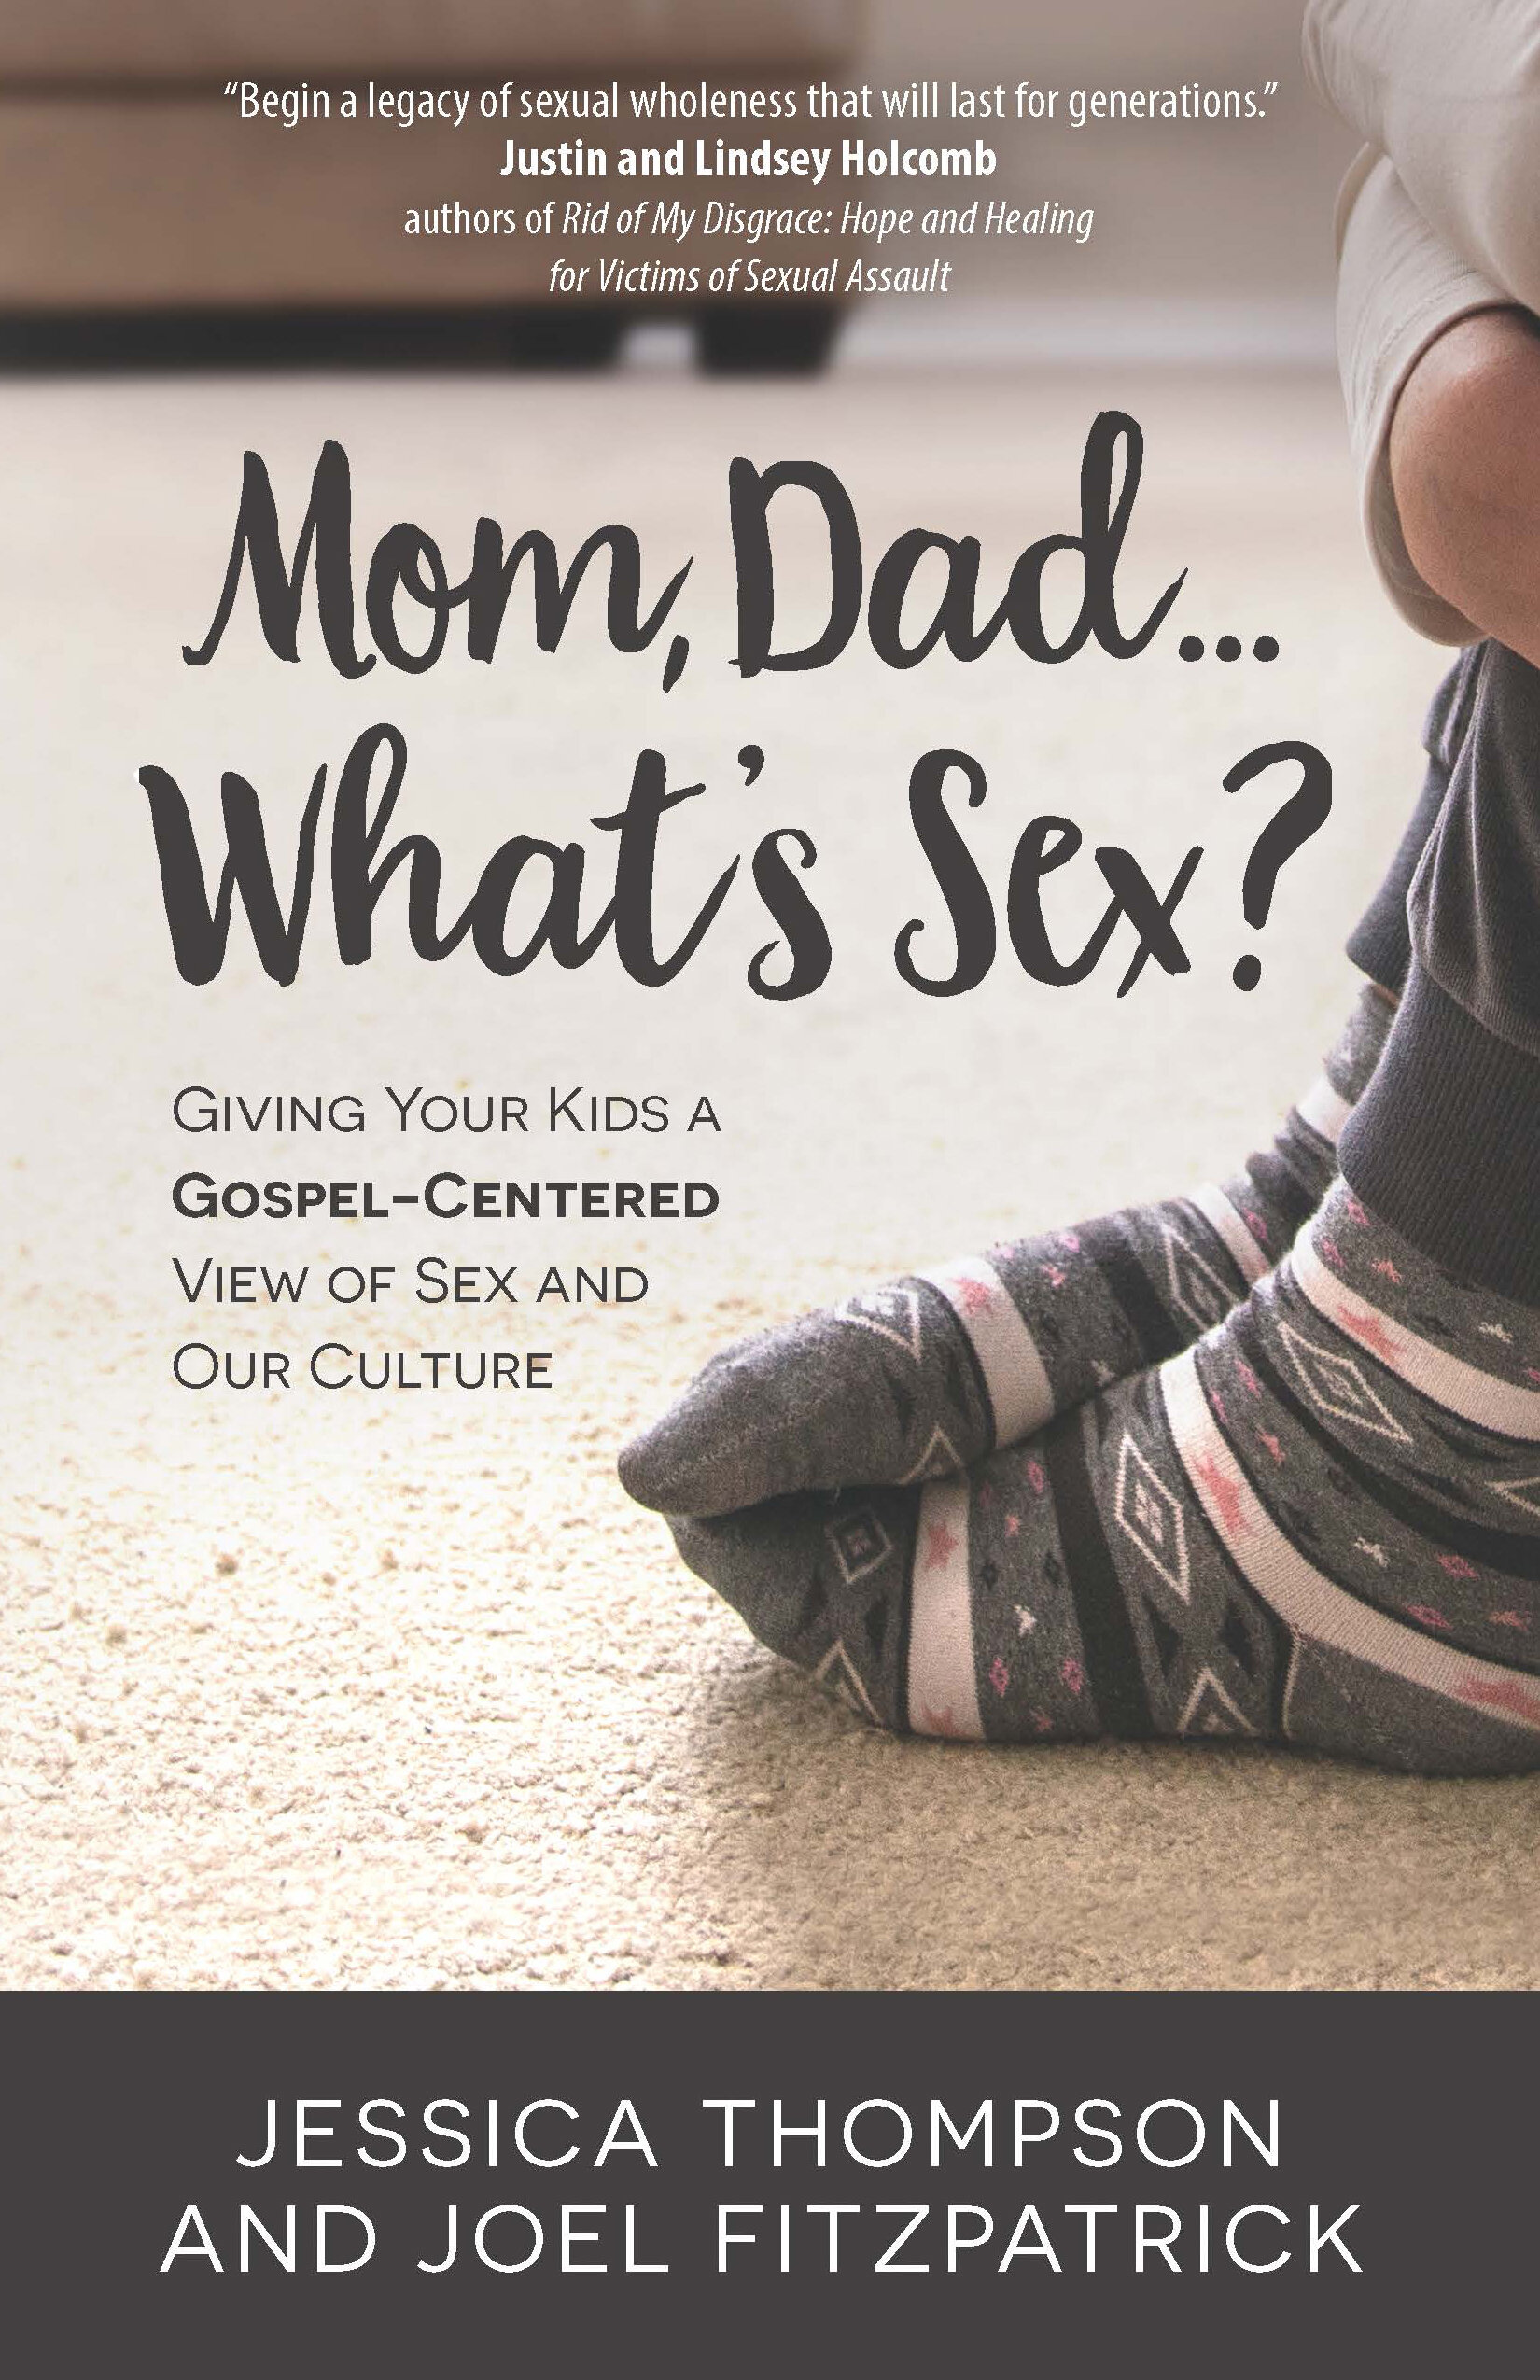 Mom, Dad...Whats Sex? Giving Your Kids a Gospel-Centered View of Sex and Our Culture Faithlife Ebooks image